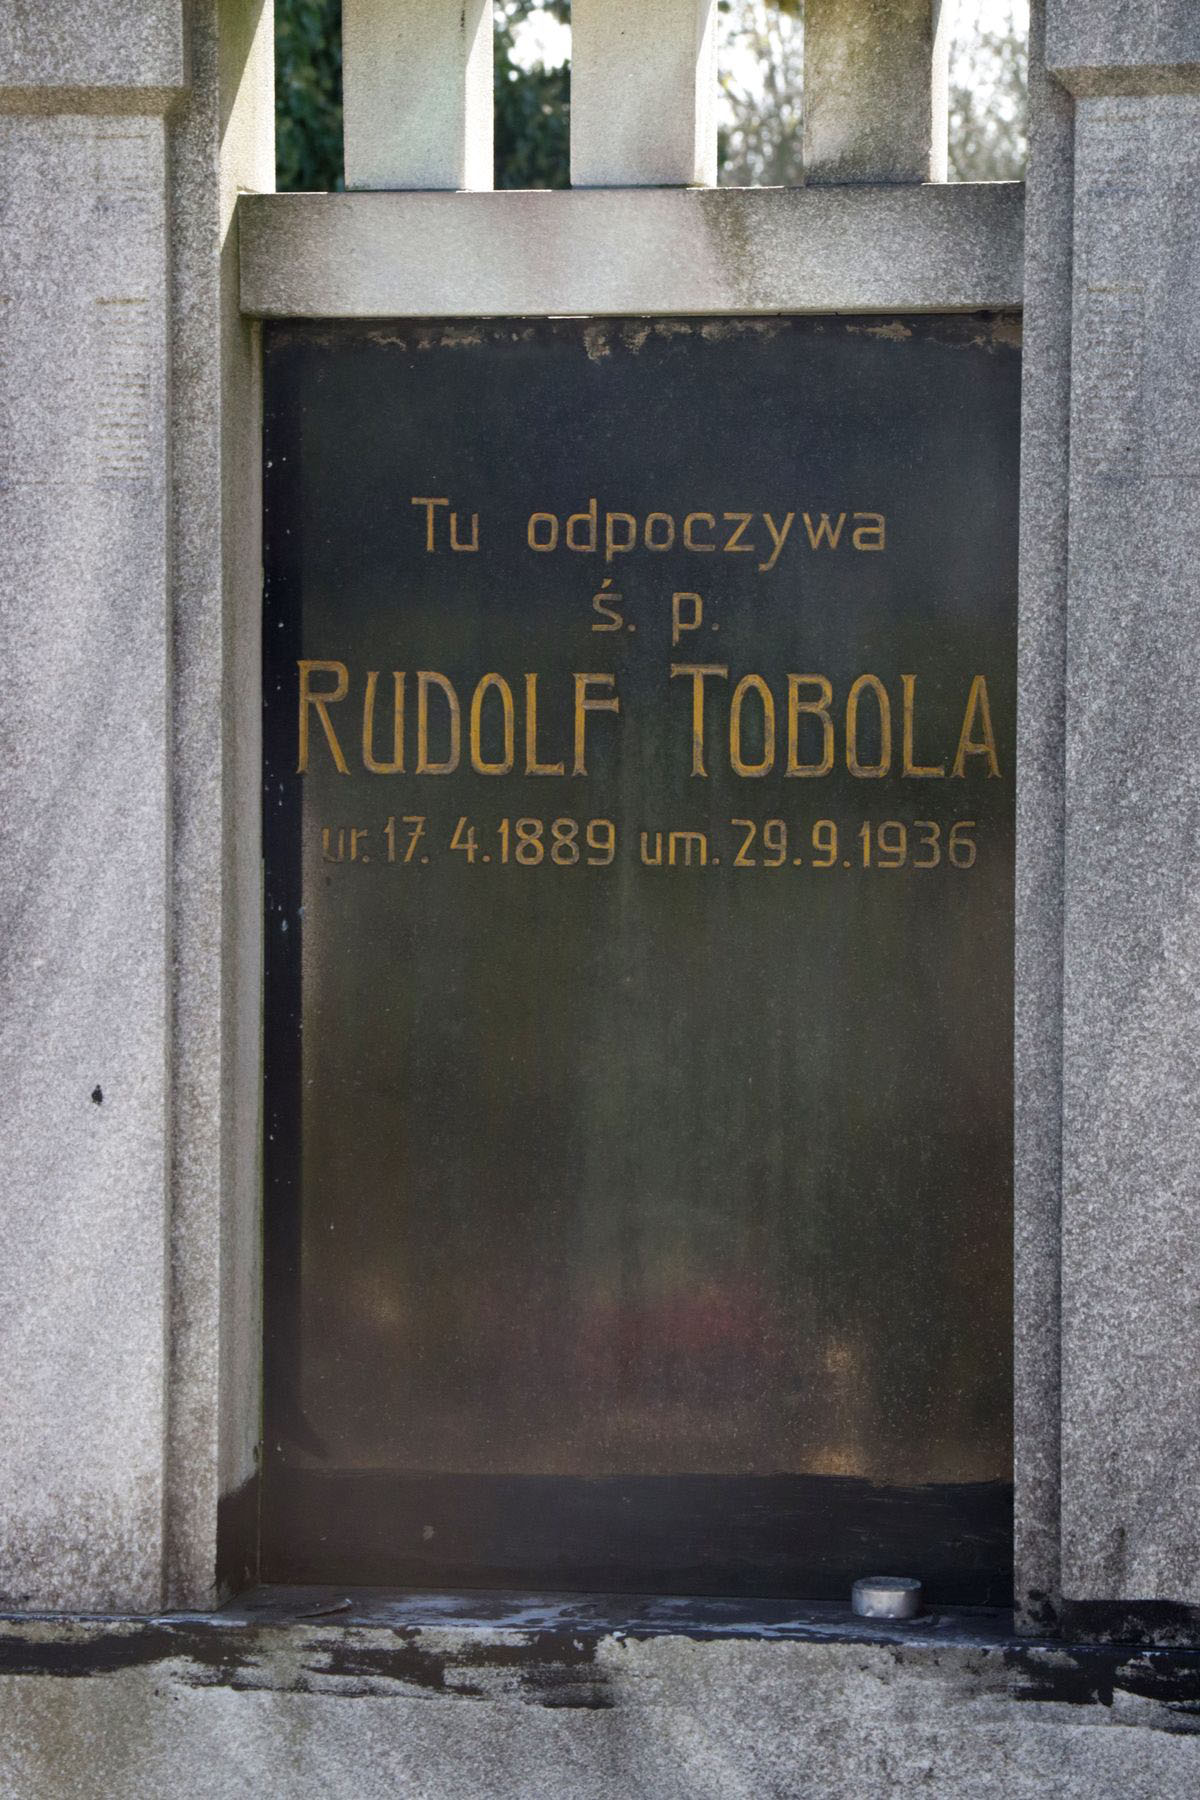 Inscription from the tombstone of Rudolf Tobola, Sibice cemetery